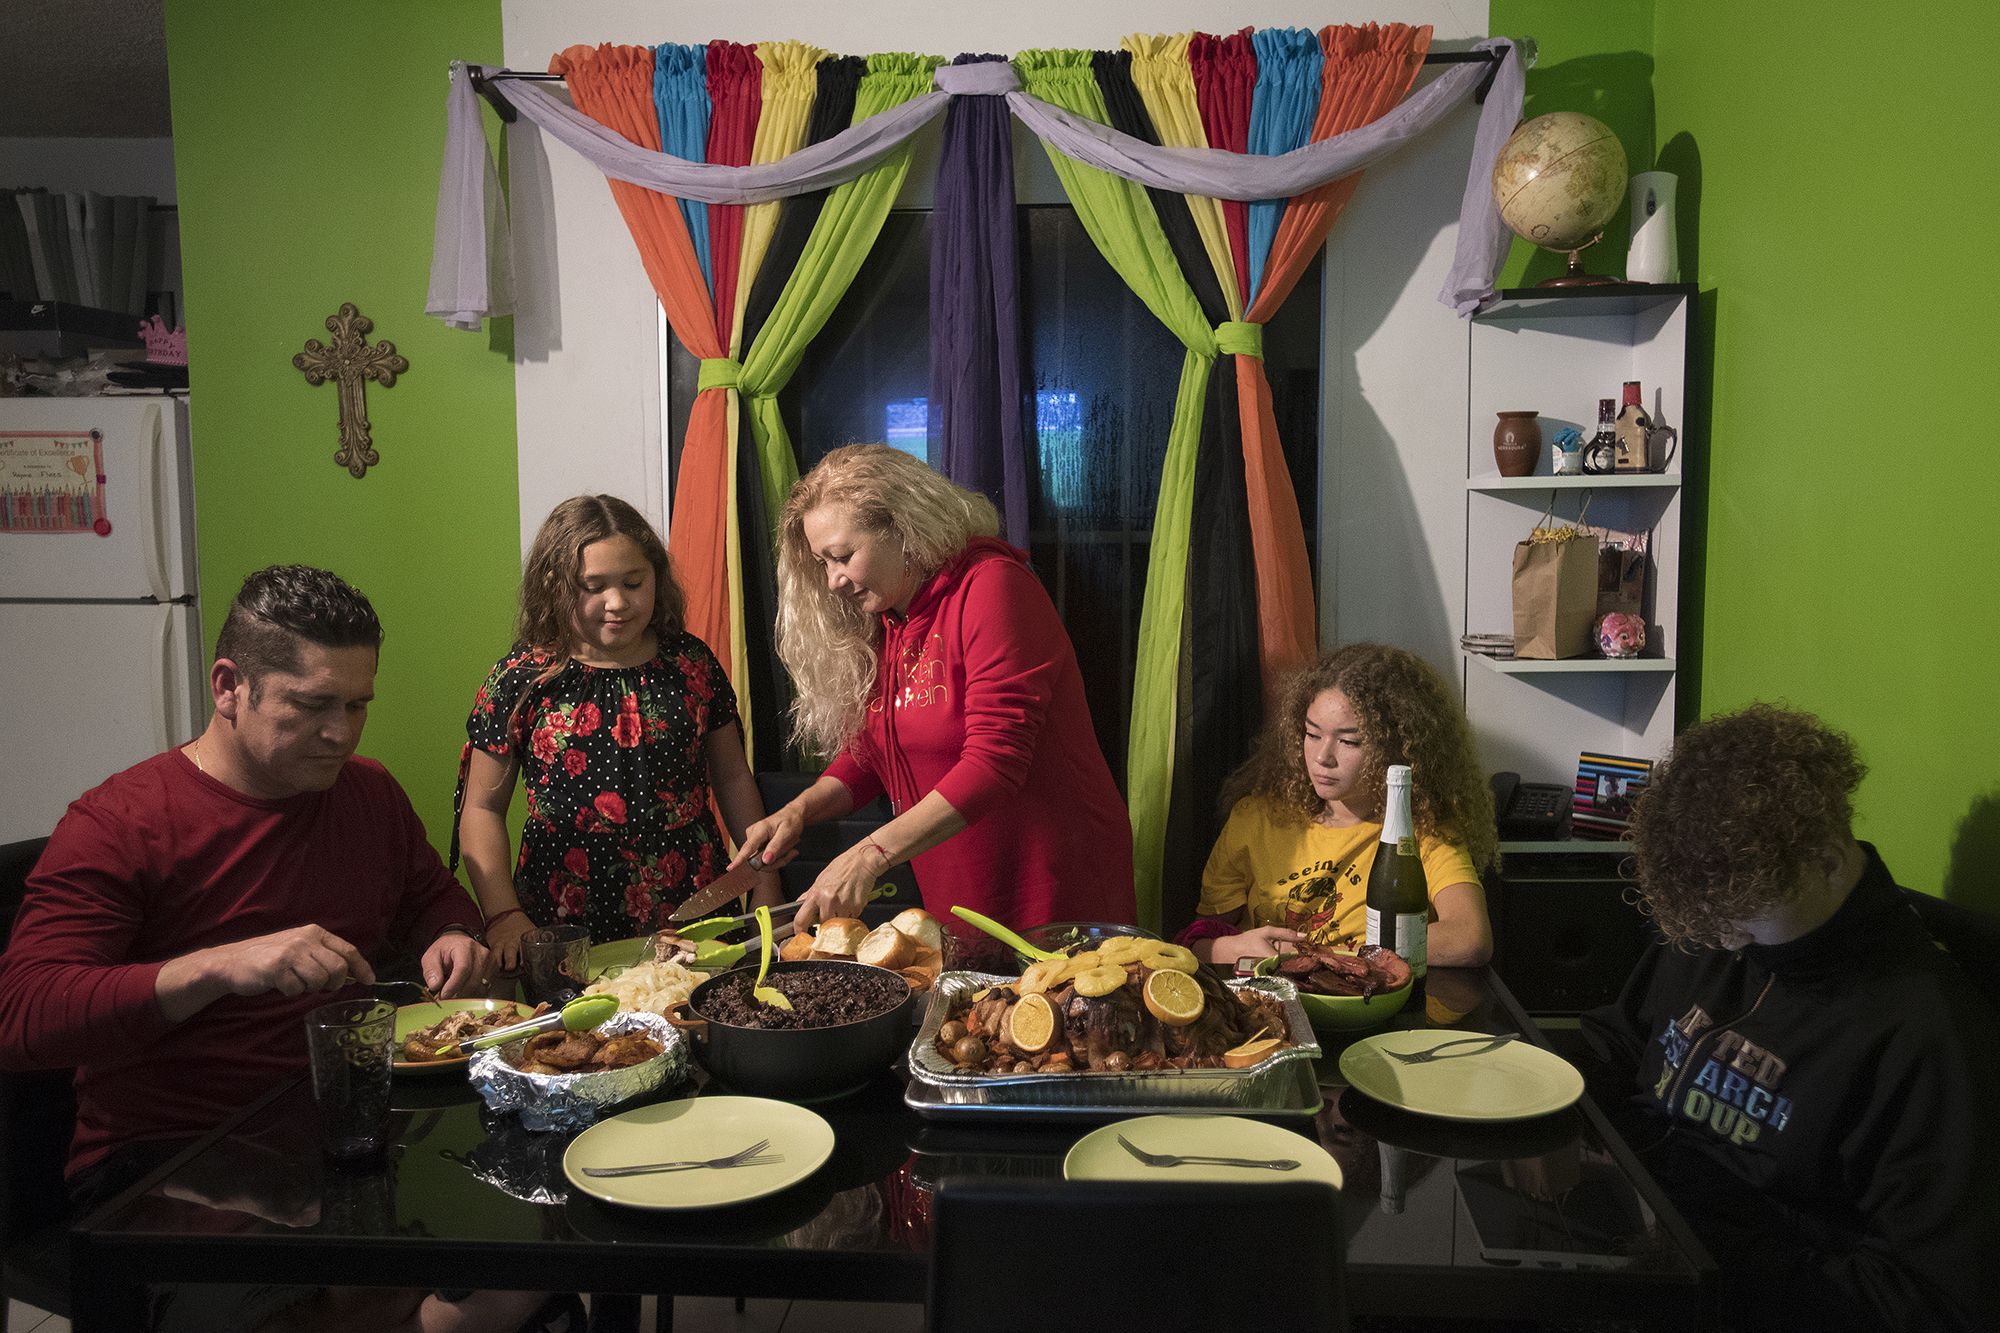 Ramon Flores, 46, from left, formerly of Hazel Dell, sits down to Thanksgiving dinner at his apartment in Tijuana, Mexico, with his daughter, Rayma, 10, wife, Enedis, 54, daughter, Kennedy, 16, and son, Raymond, 15. His family, who now lives in Chula Vista, Calif., crossed the U.S.-Mexico border shortly before midnight Wednesday so they could be together for the American holiday. Image by Amanda Cowan. Mexico, 2019.